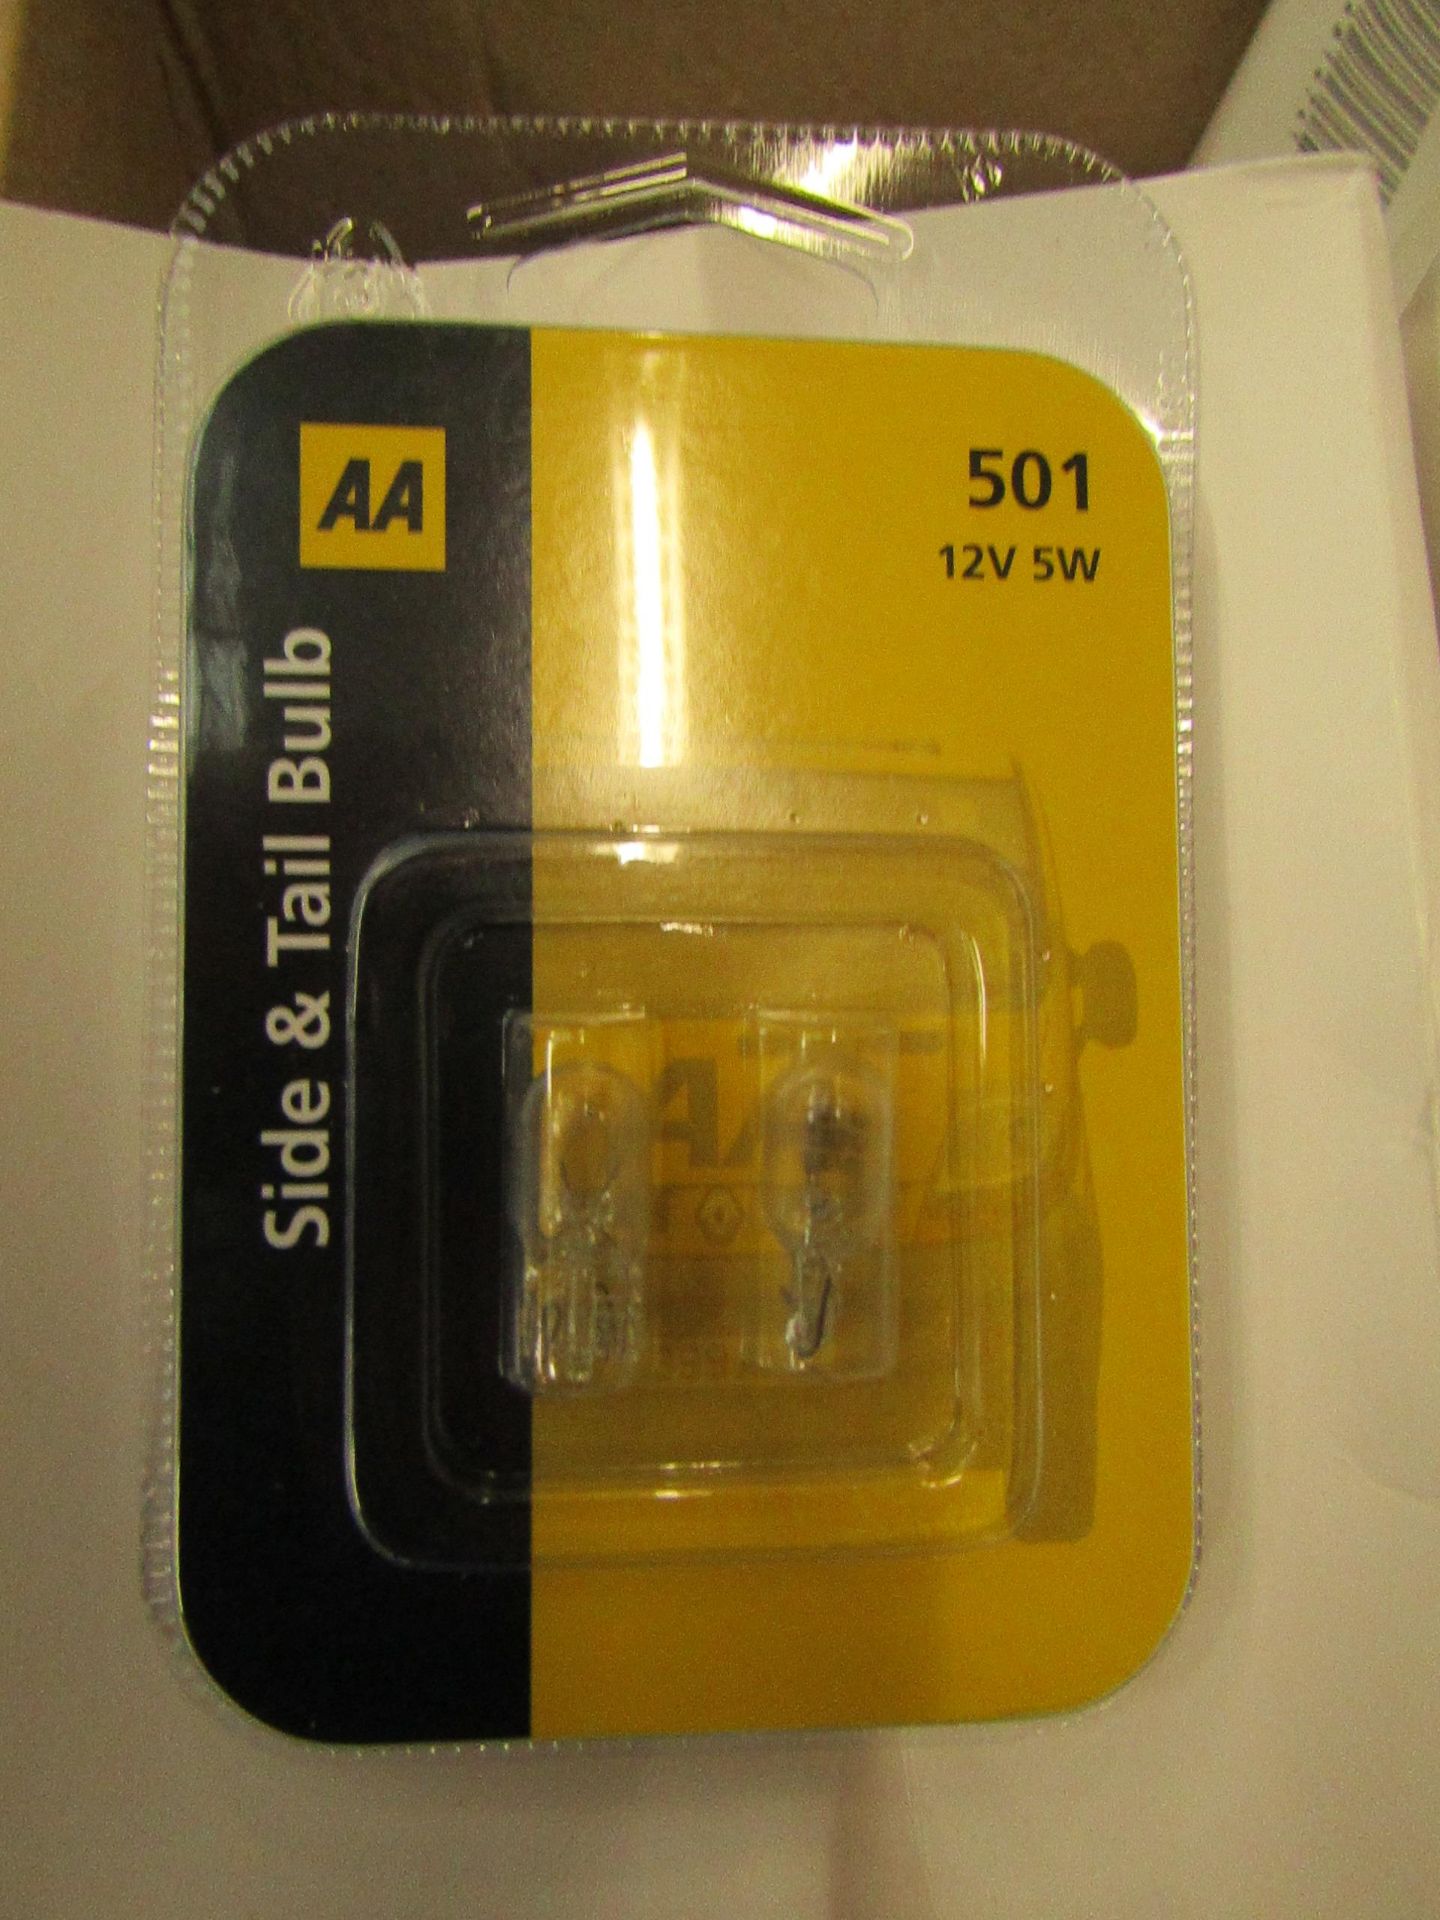 Approx 10Packs of 2 AA Side & Tail Bulbs. 501, 12v 5w. Packaged